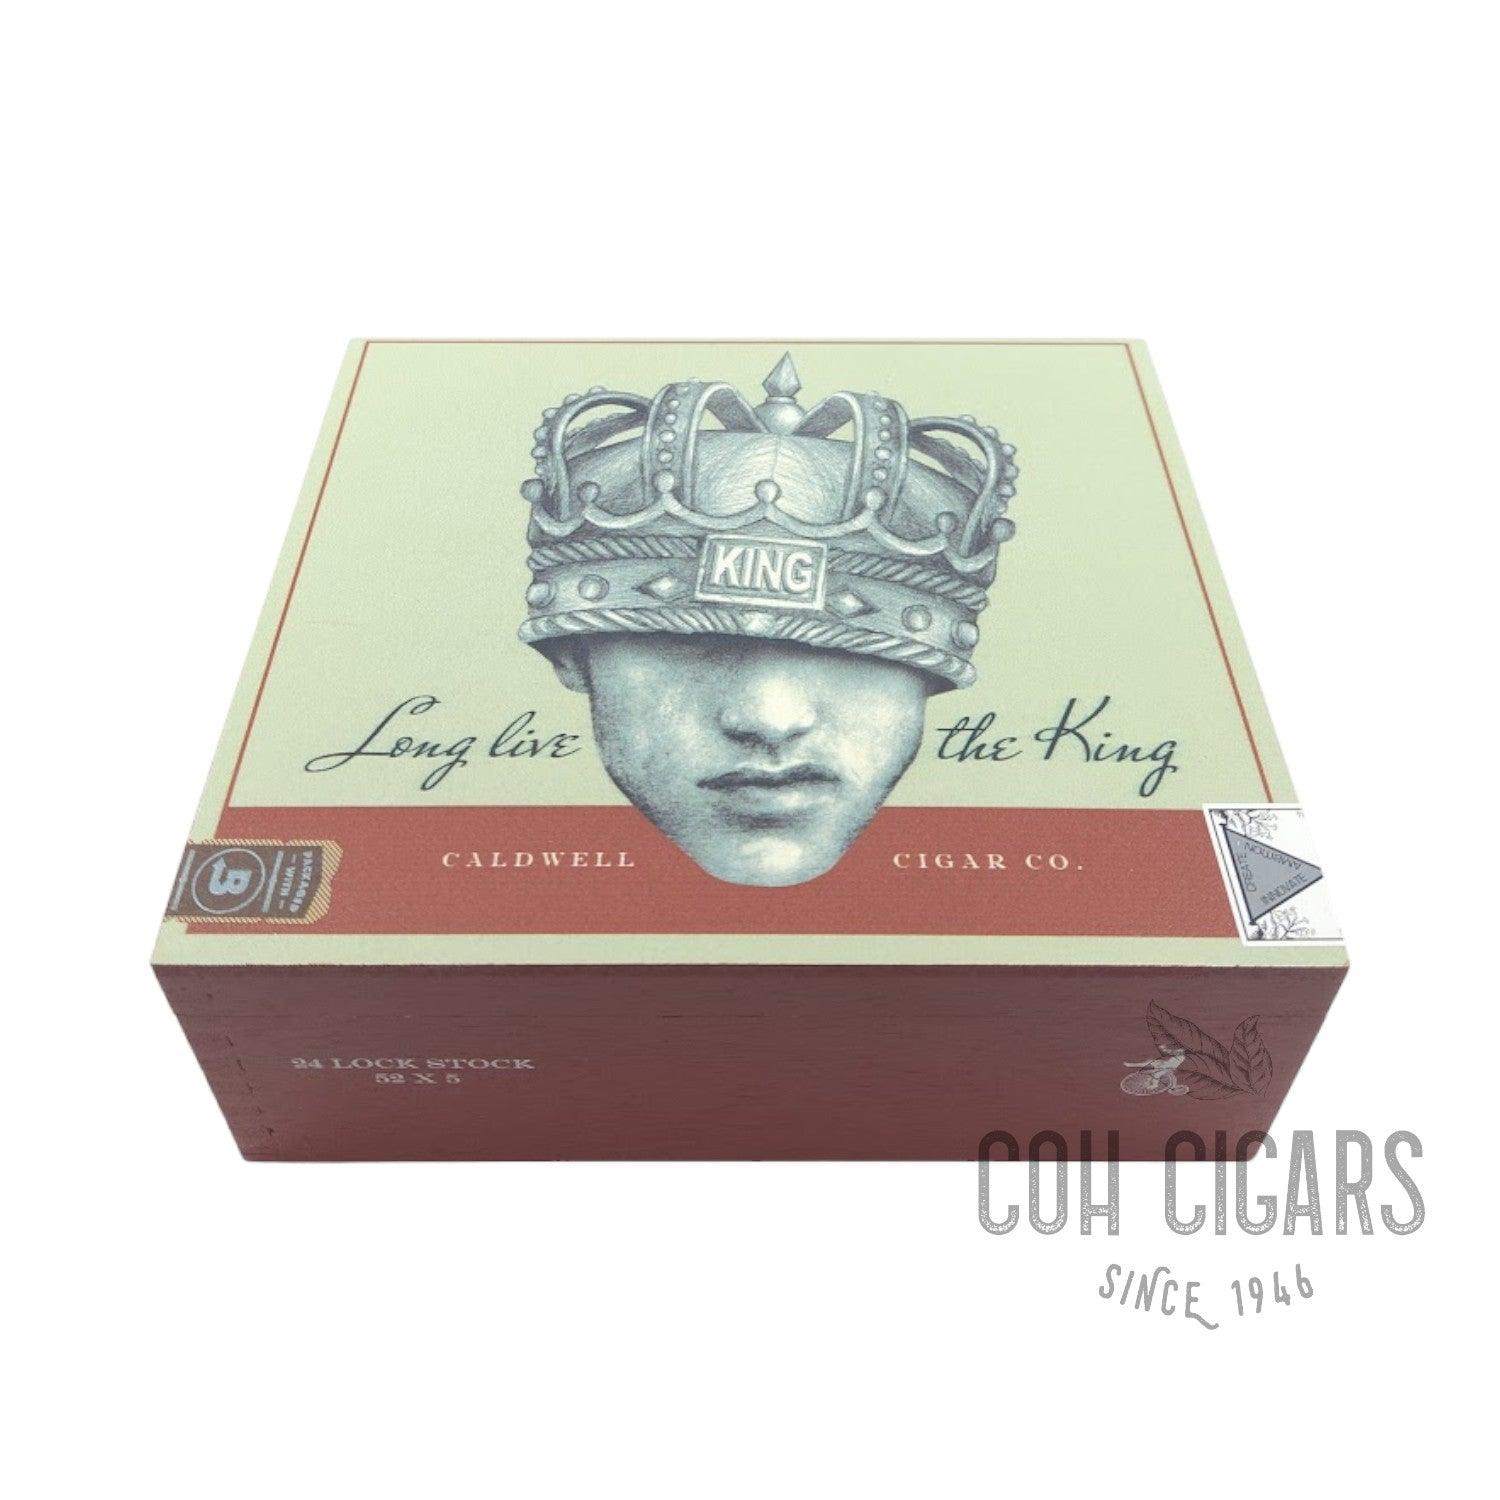 Caldwell Cigar | Long Live The King Belicoso | Box 24 - hk.cohcigars